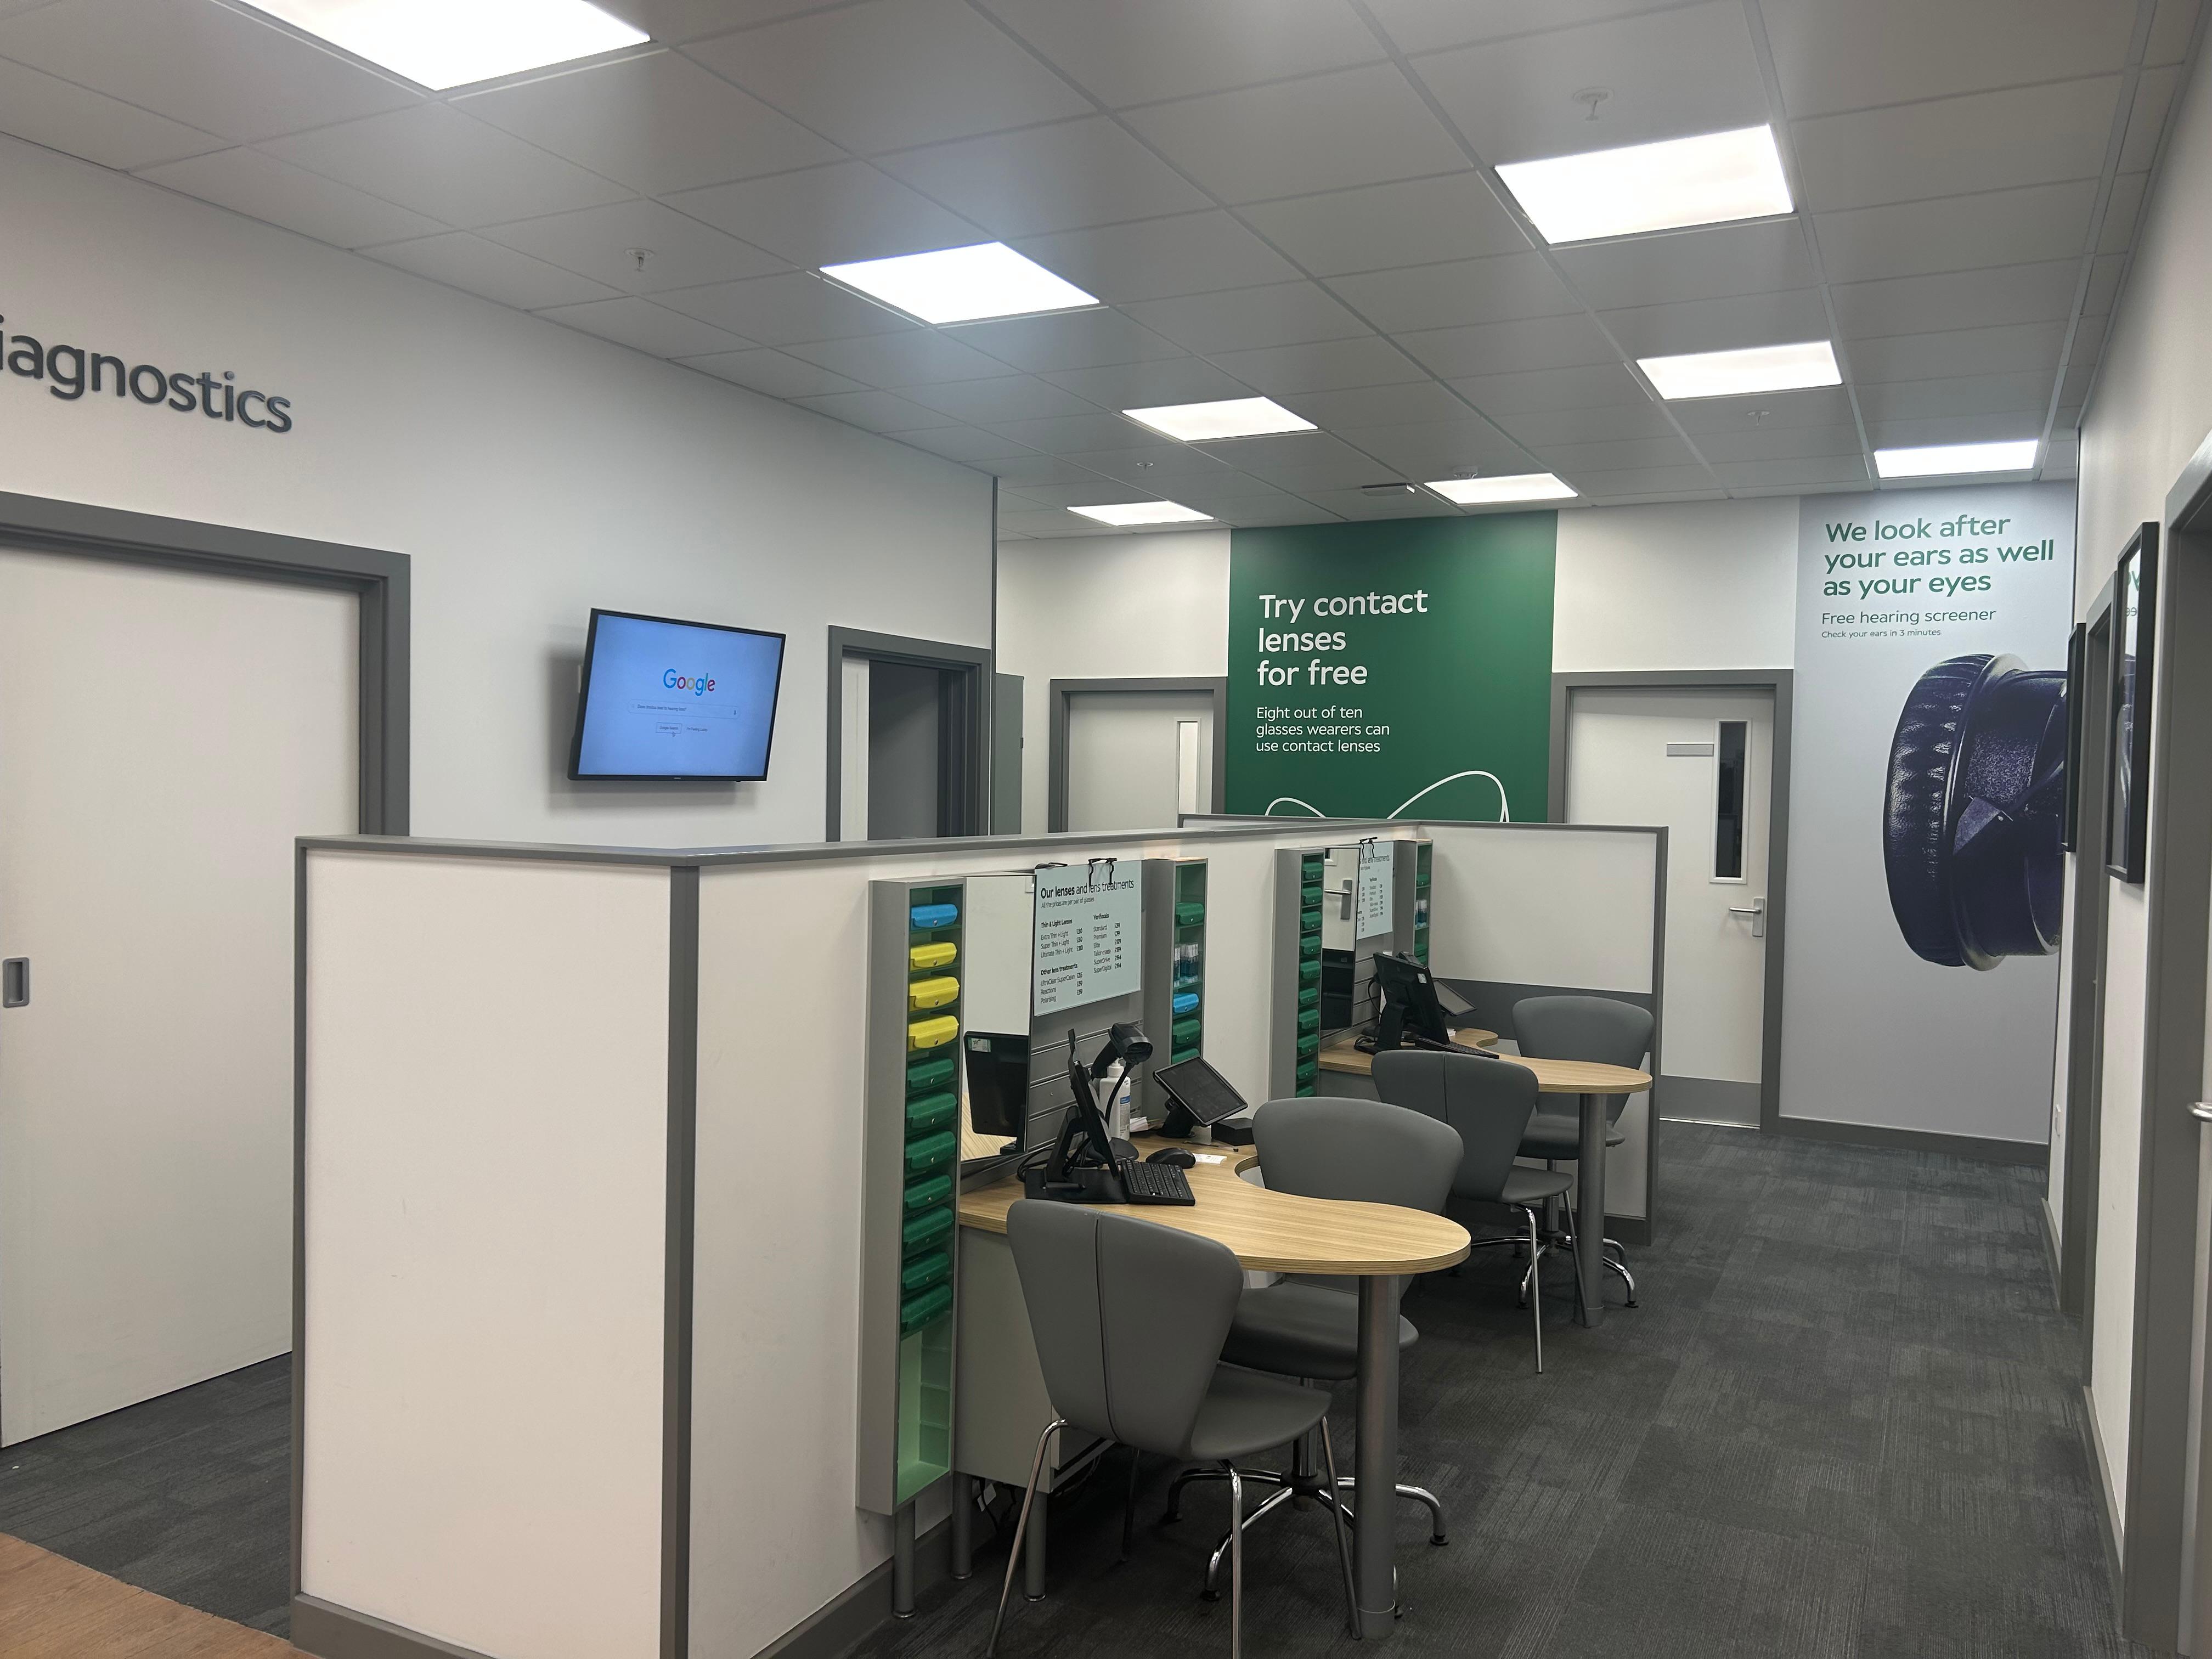 Images Specsavers Opticians and Audiologists - Upton Sainsbury's